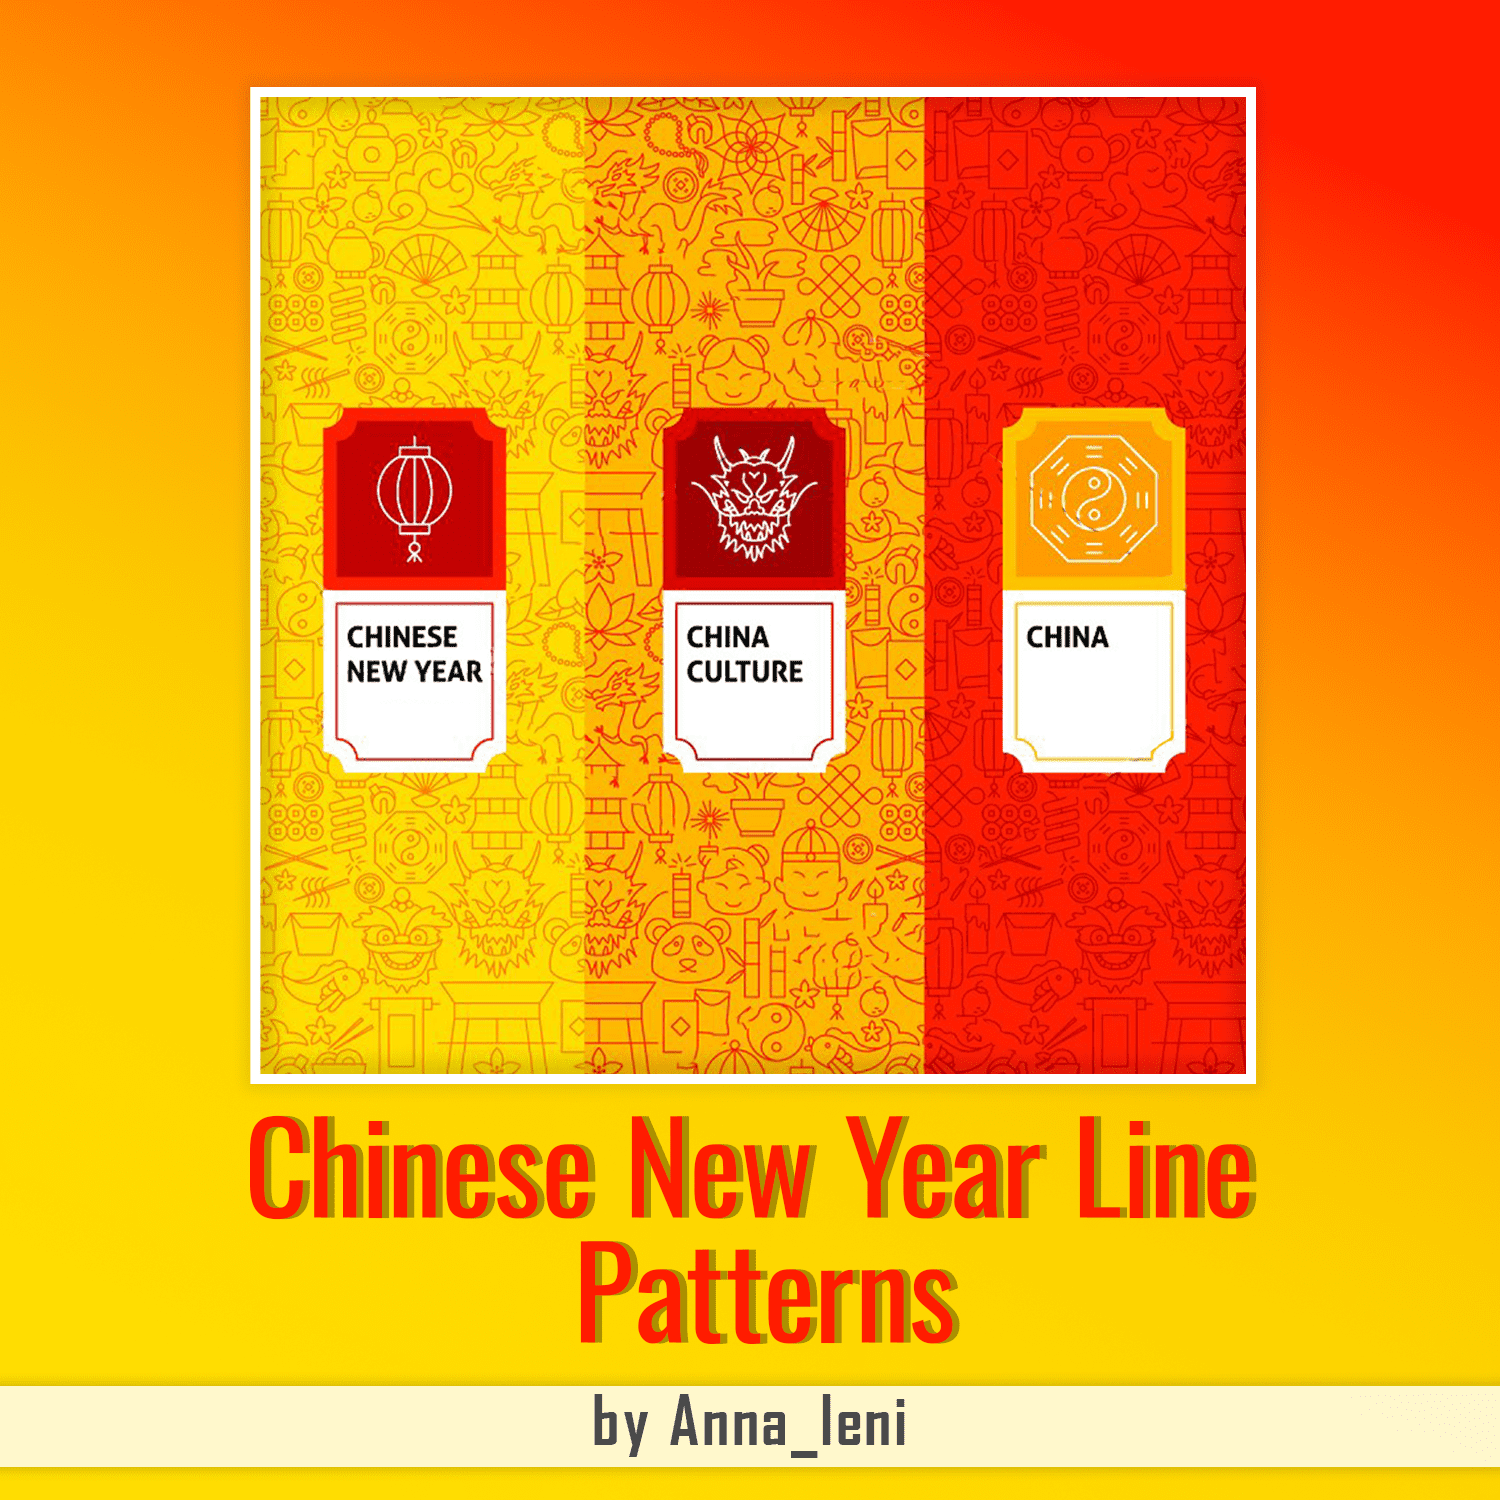 Chinese New Year Line Patterns cover.